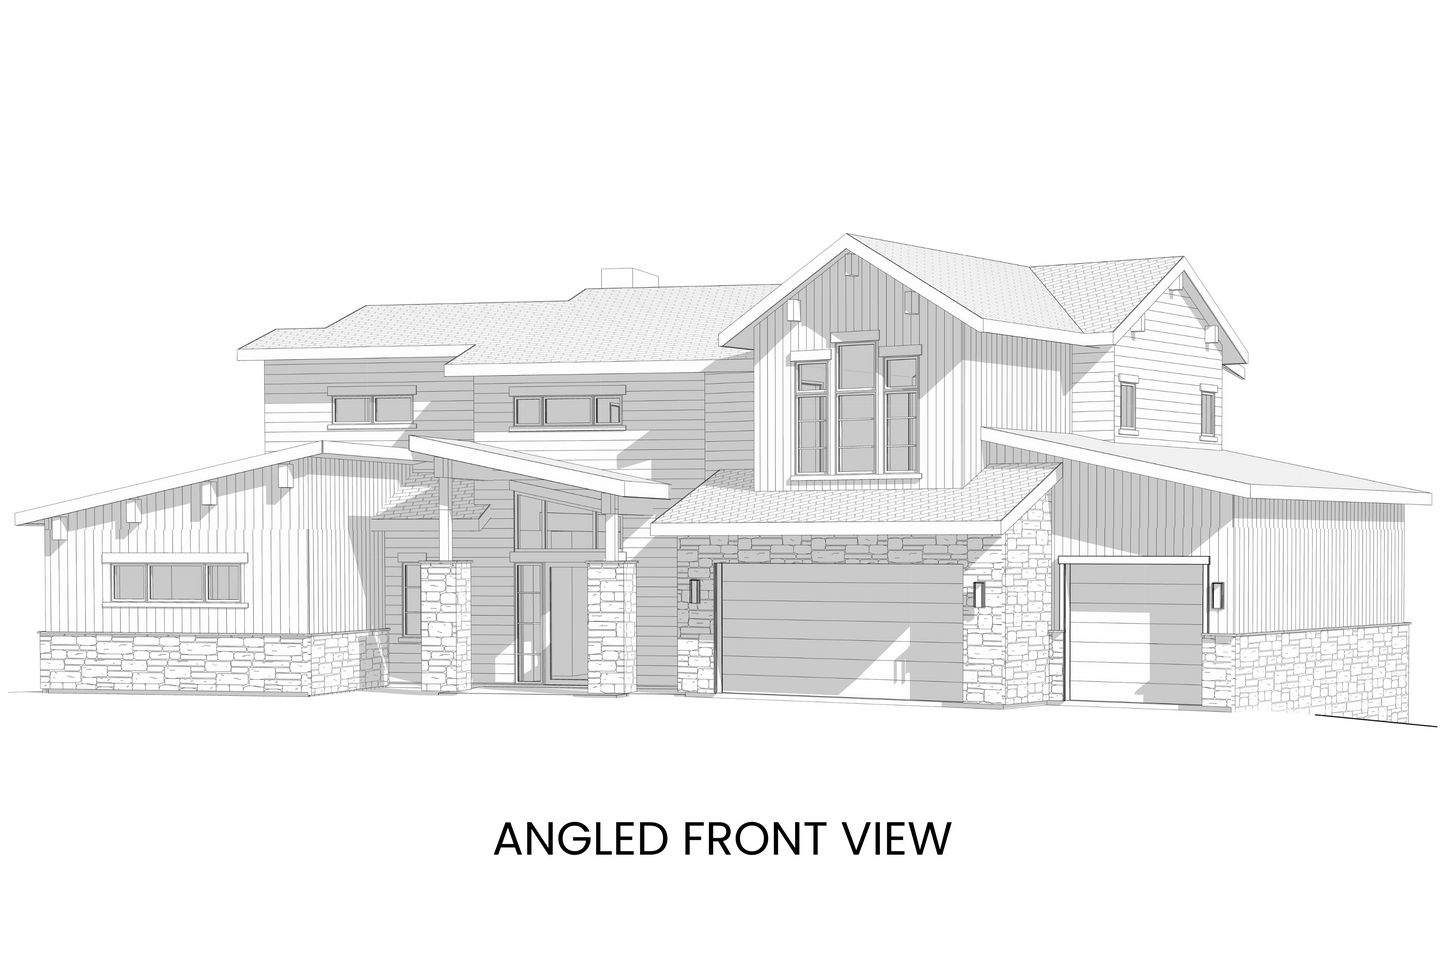 Modern-House-Plan-with-Four-Bedrooms-Front-View-Rocky-Mountain-Plan-Company-Citadel-Peaks